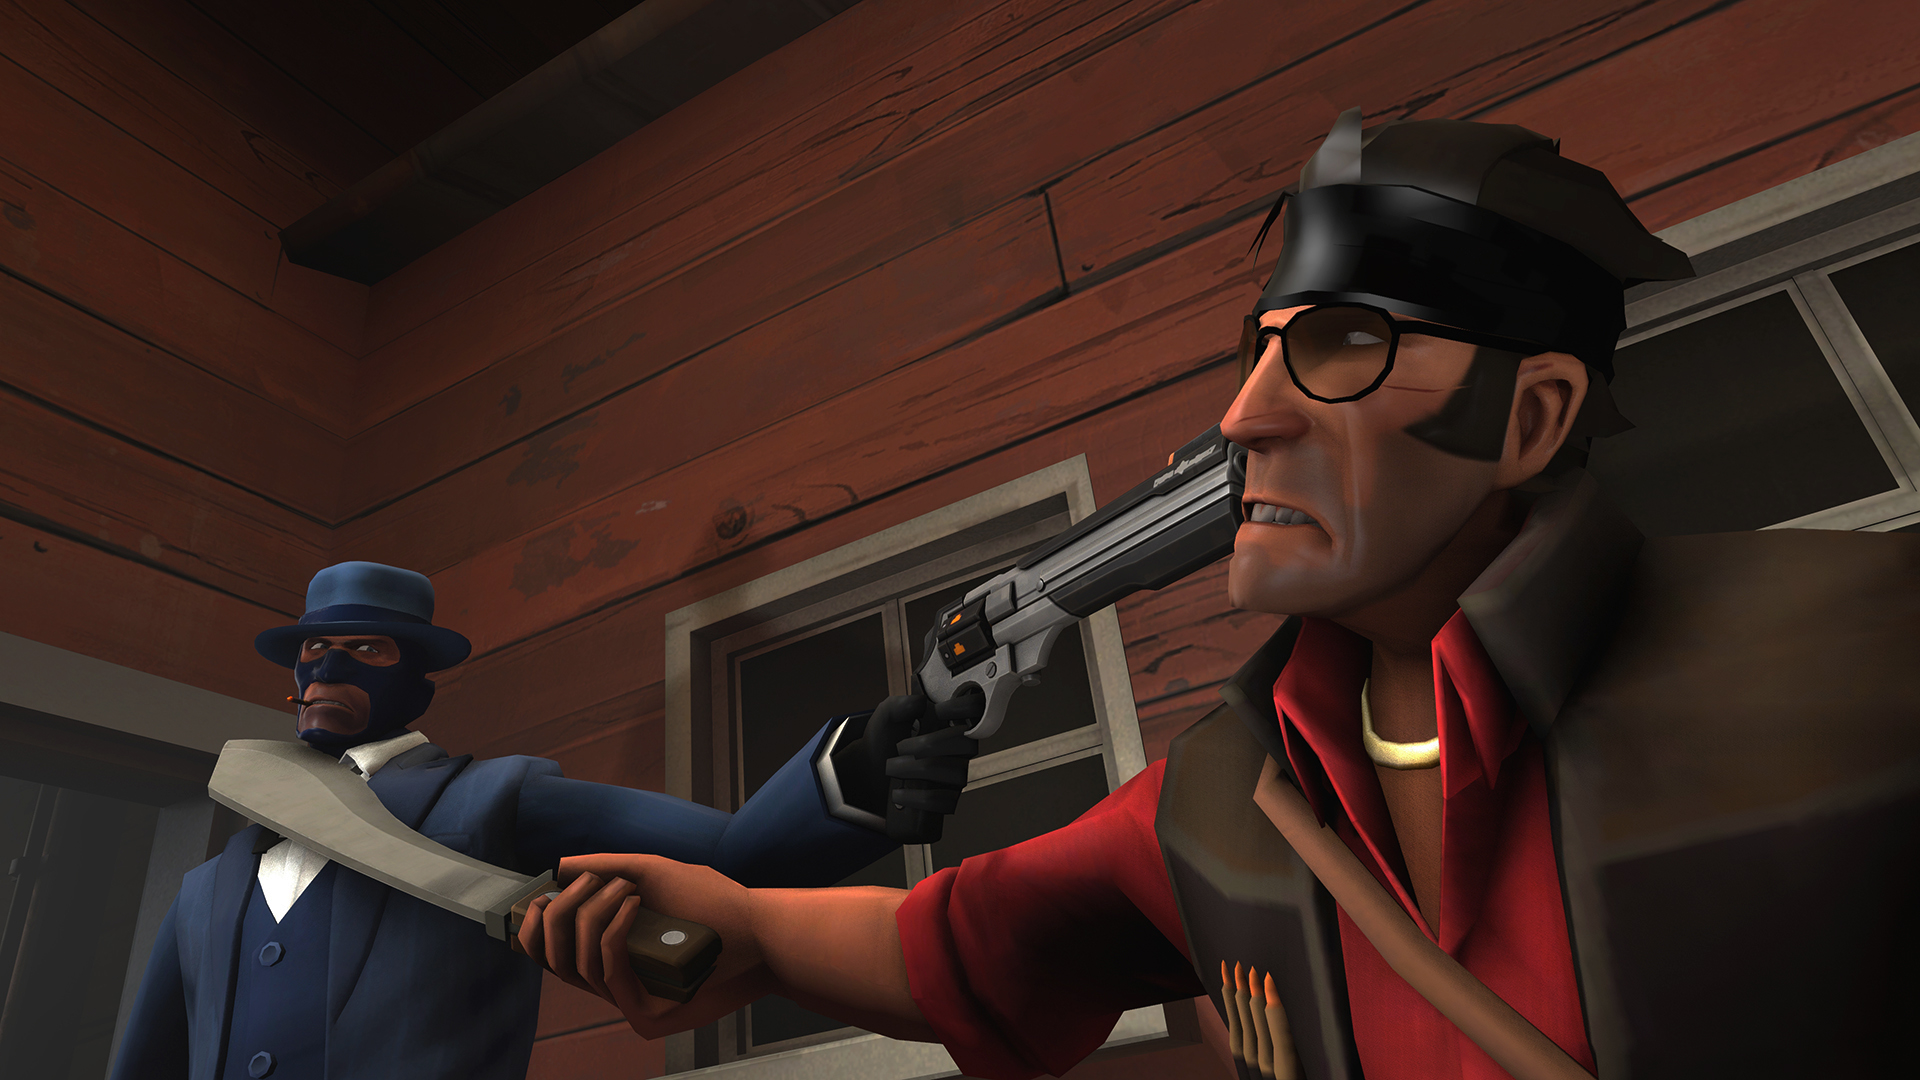 Free download wallpaper Team Fortress 2, Video Game, Team Fortress, Spy (Team Fortress), Sniper (Team Fortress) on your PC desktop